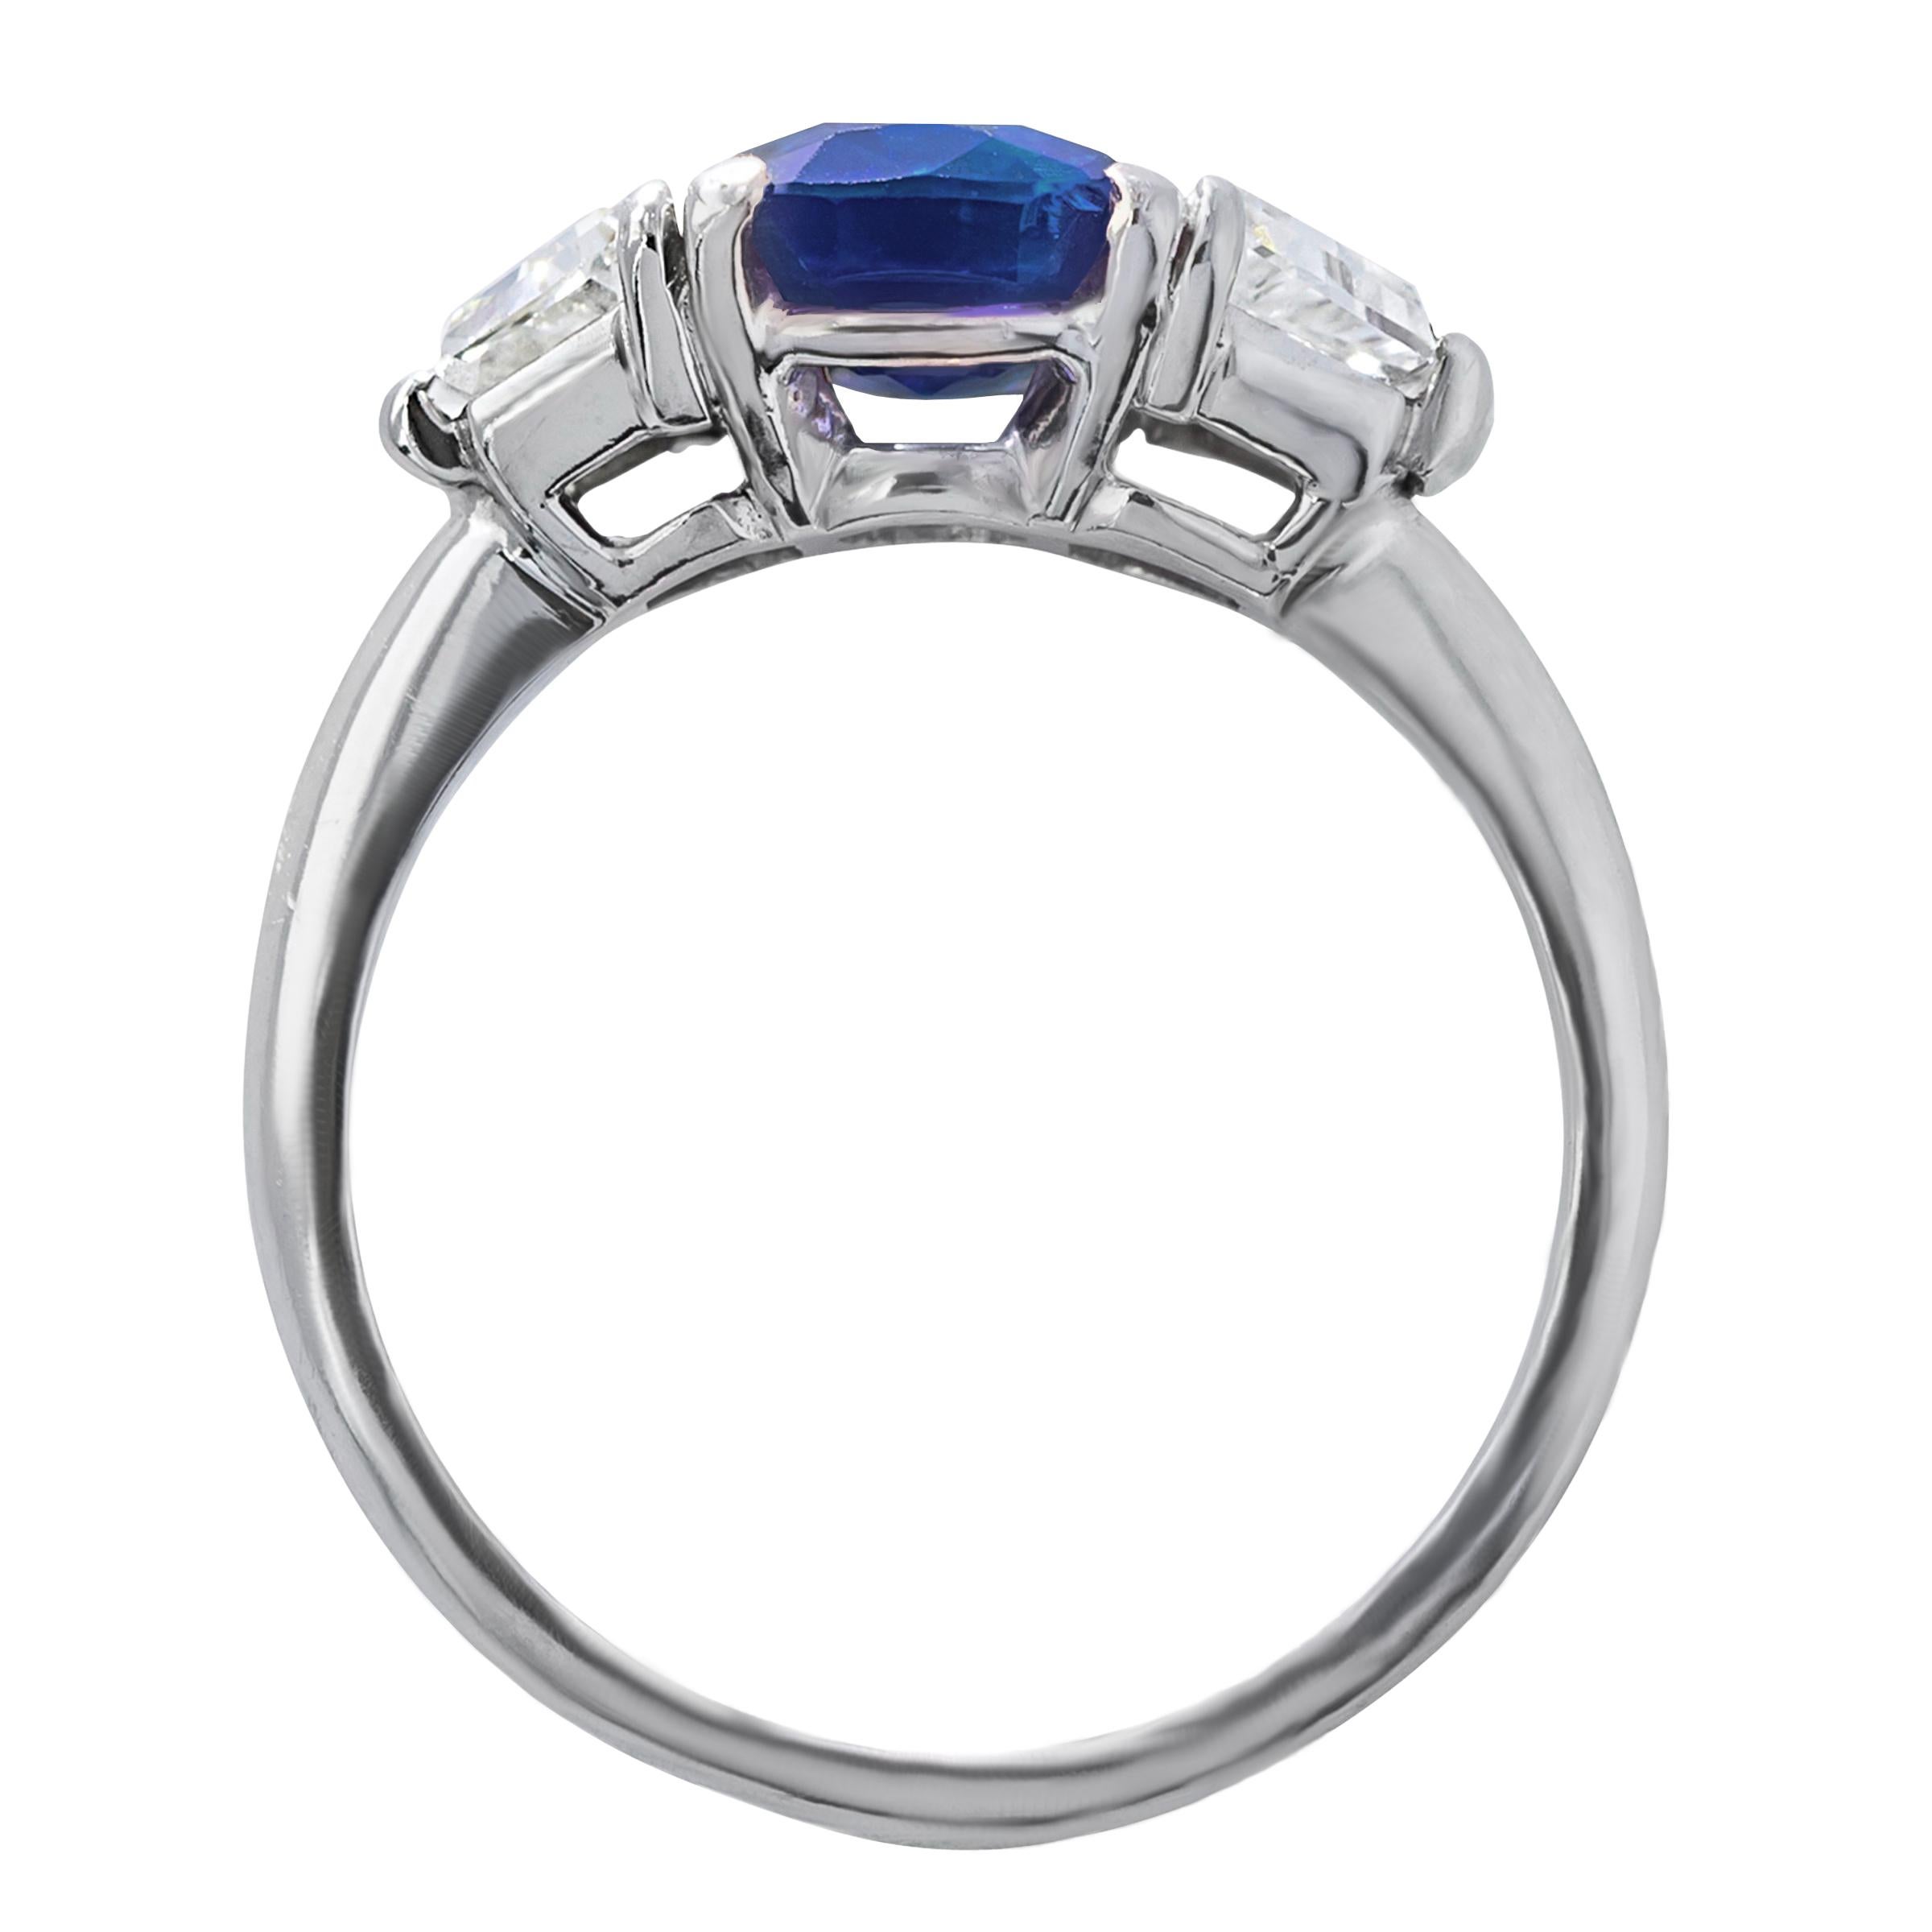 An exquisite 4 carat oval cut certified Ceylon Cornflower Blue Sapphire without any treatment is NO HEAT  set in a custom made platinum ring with .80 carats of white side diamonds.

Certified by GRS Lab of Switzerland and GIA.

Currently a size 6,